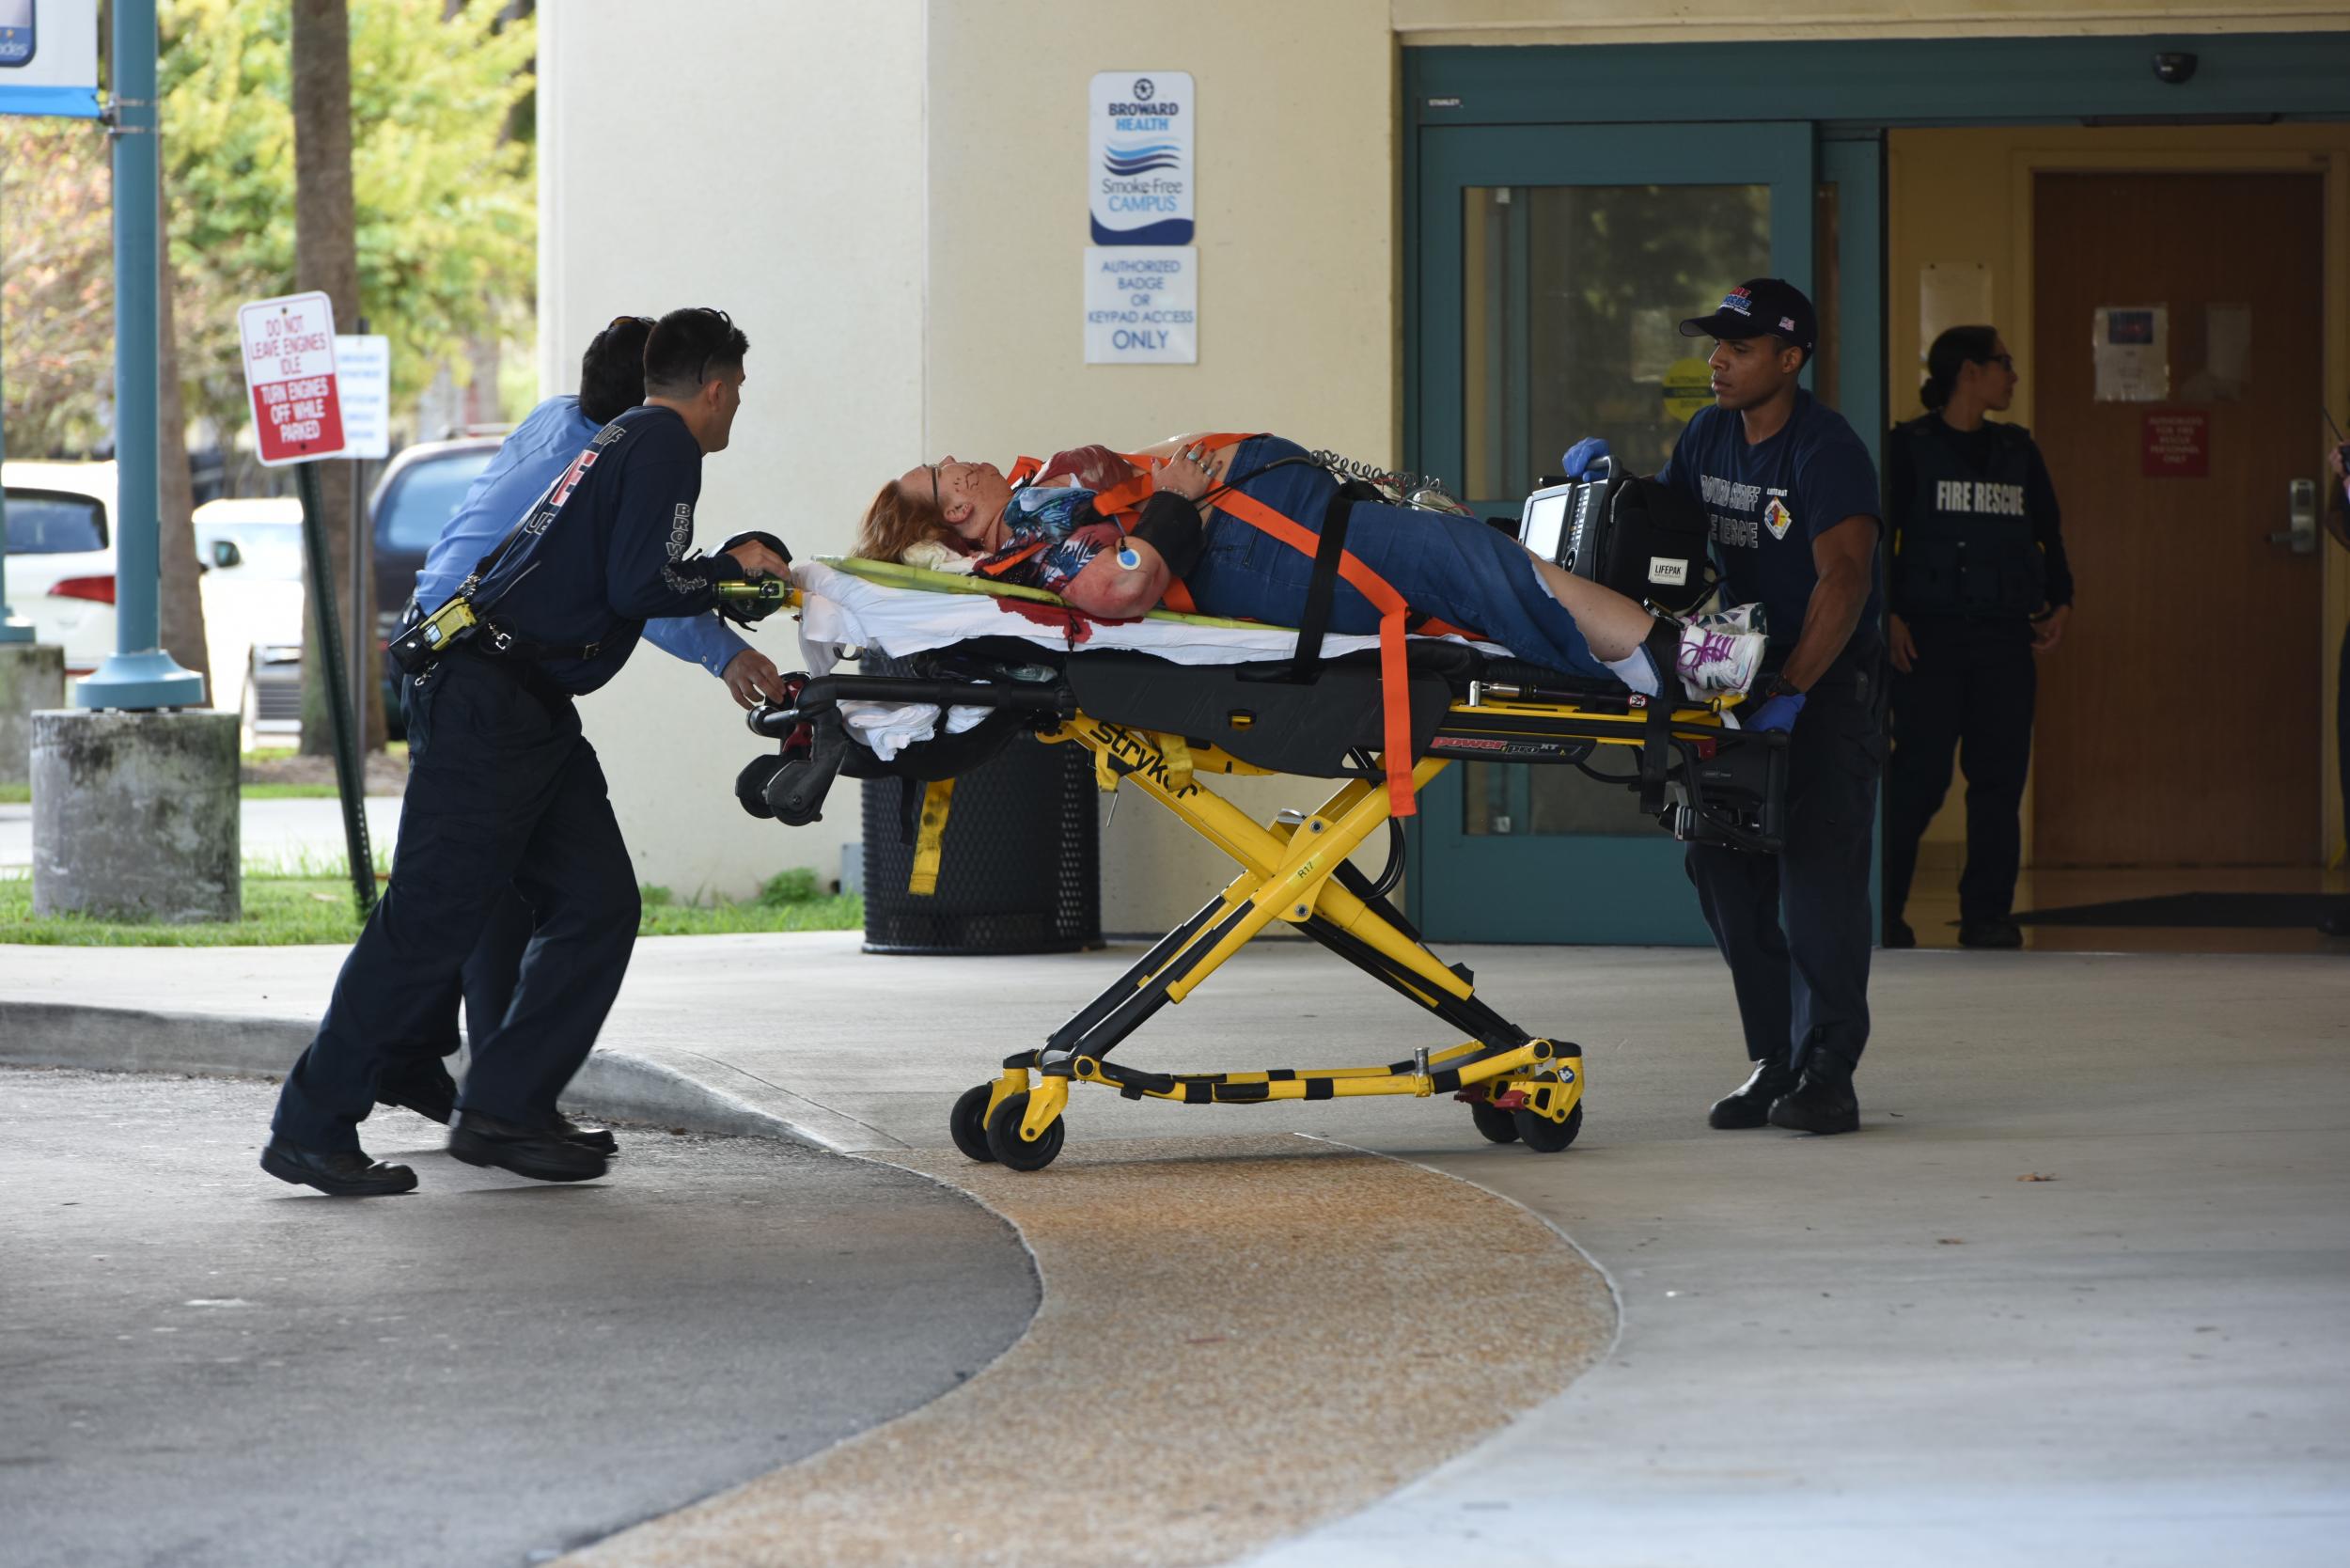 A shooting victim is taken into Broward Health Trauma Center in Fort Lauderdale